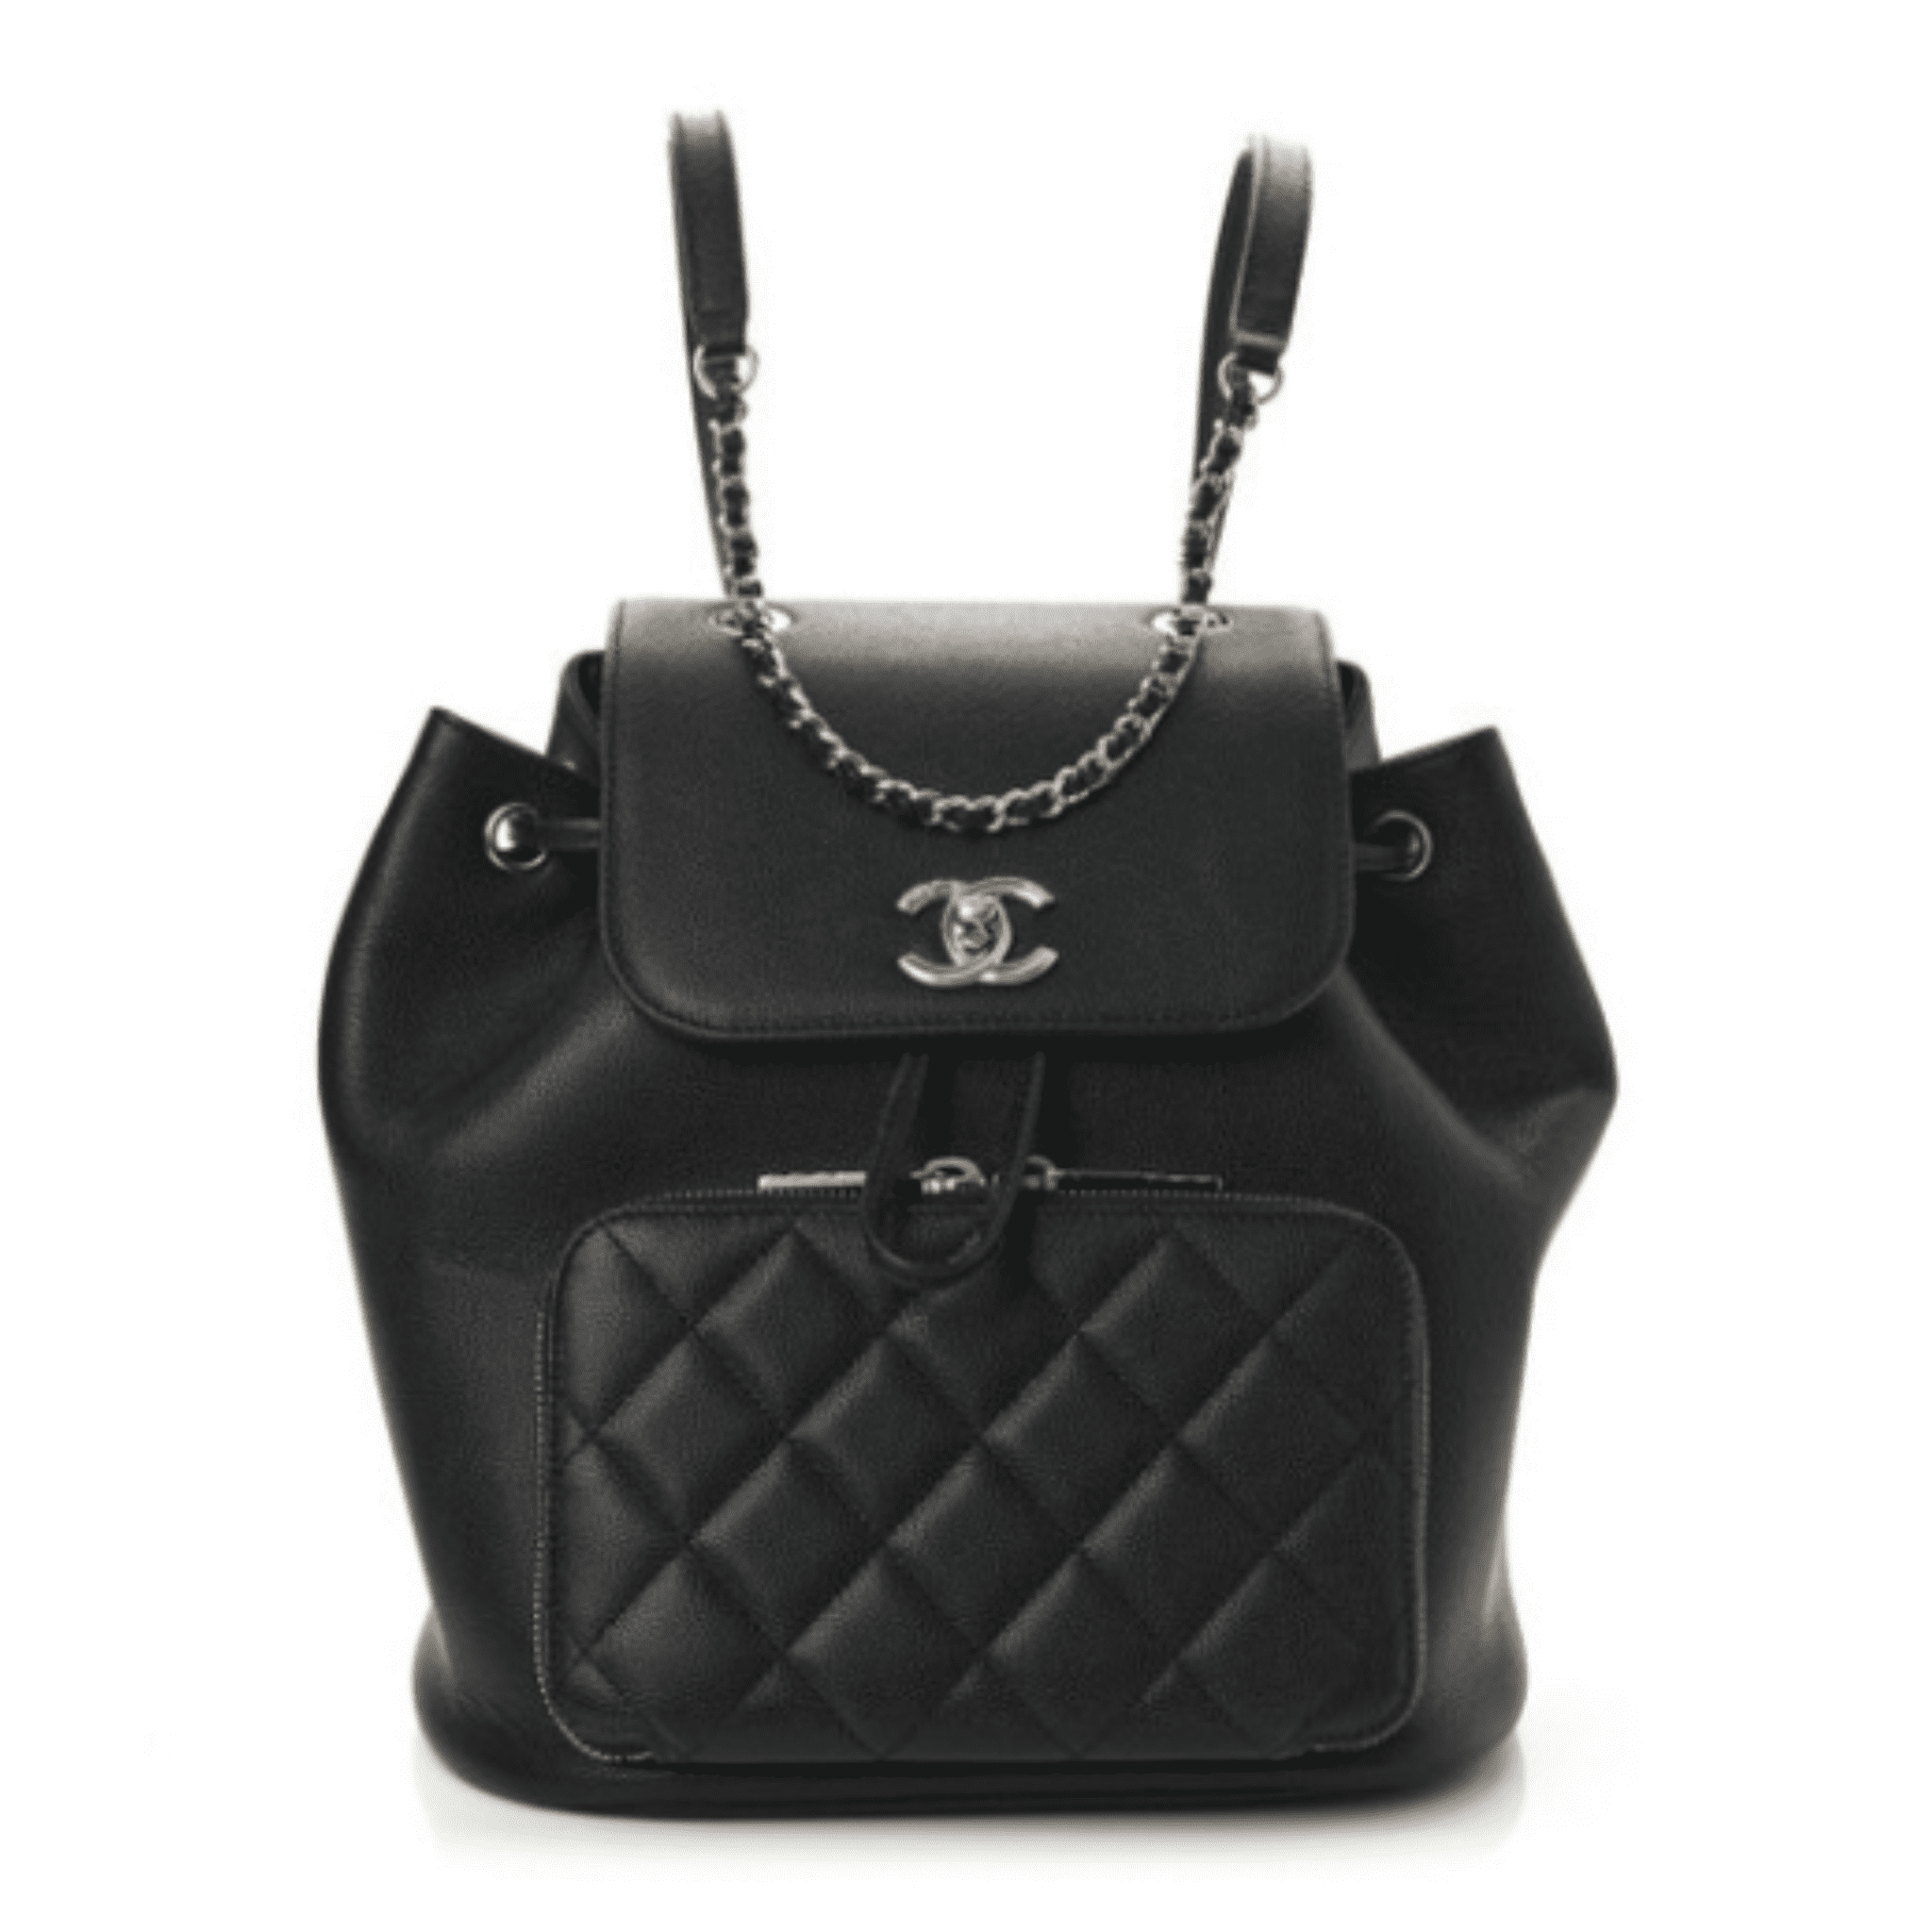 Black and gold Chanel Backpack with front pocket.